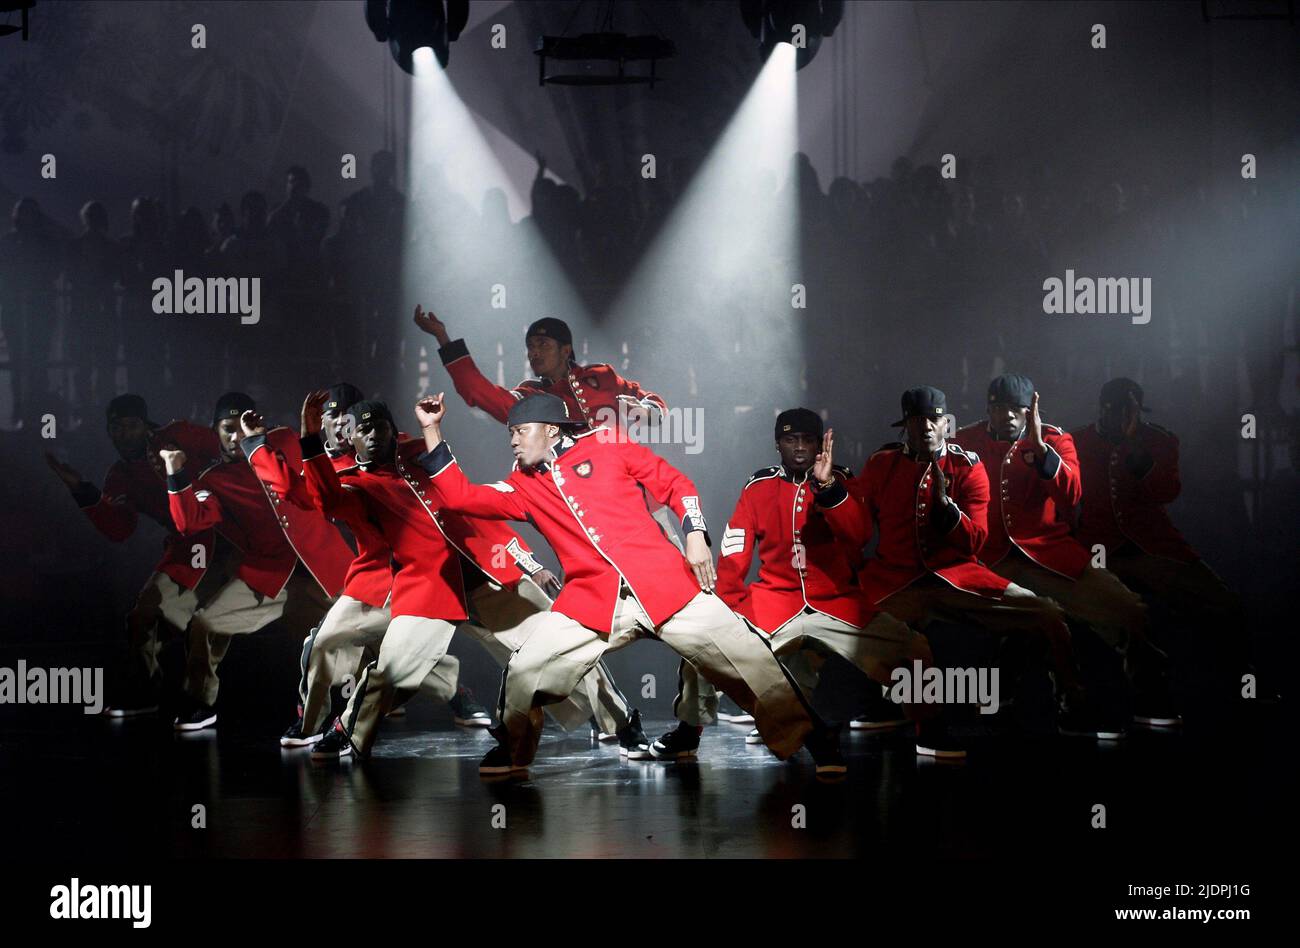 DANCE TROUPE FLAWLESS, STREETDANCE 3D, 2010, Stock Photo